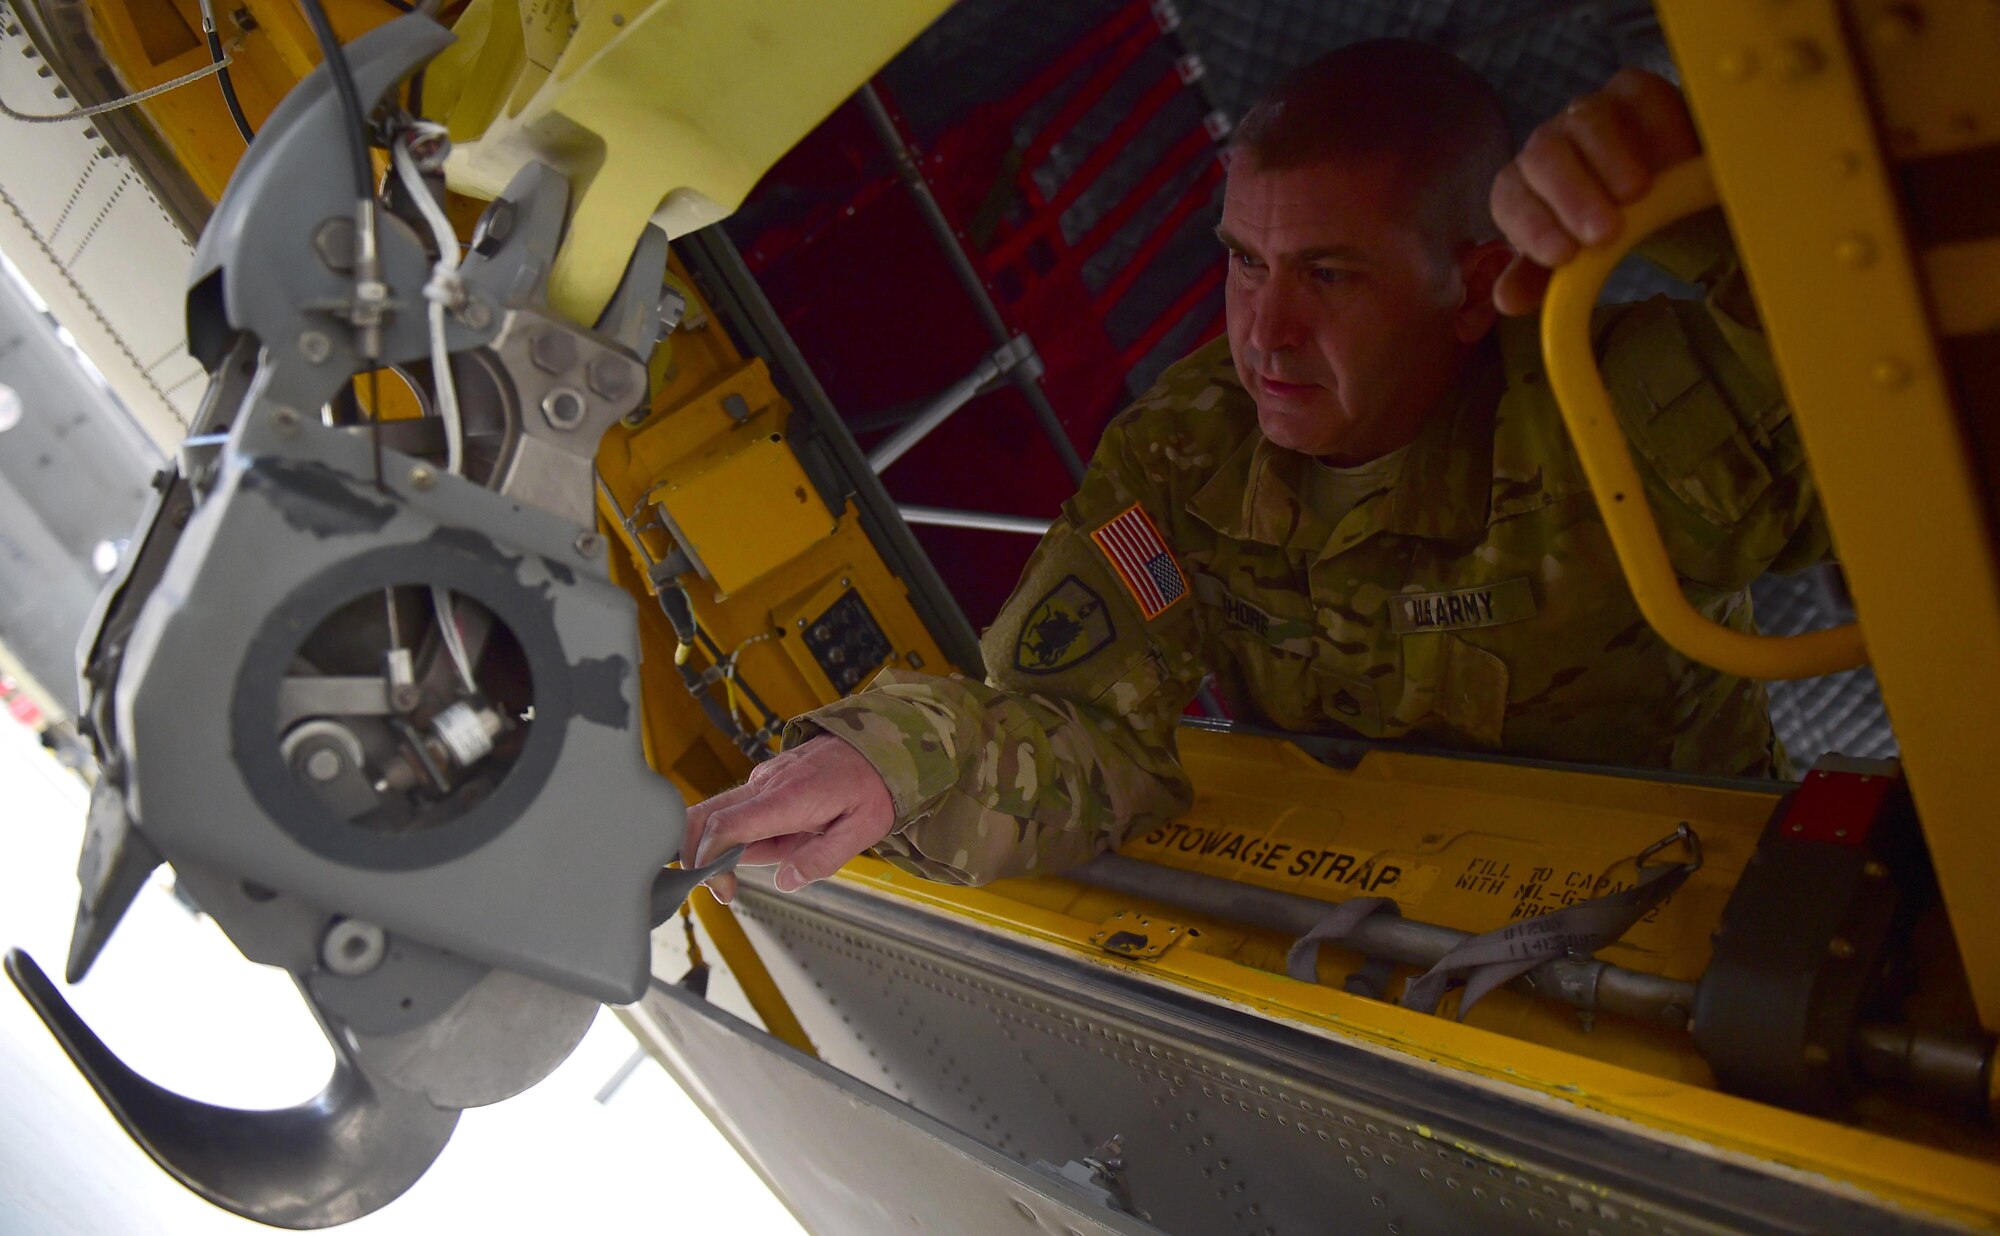 U.S. Army Staff Sgt. Wade Shore, Colorado Army National Guard CH-47 crew chief, demonstrates how the sling load hook moves in a helicopter March 3, 2016, at the Army Aviation Support Facility on Buckley Air Force Base, Colo. While in flight, the Chinook crew chief, utilizes the sling load hook to maneuver the helicopter’s load. (U.S. Air Force photo by Airman 1st Class Gabrielle Spradling/Released)